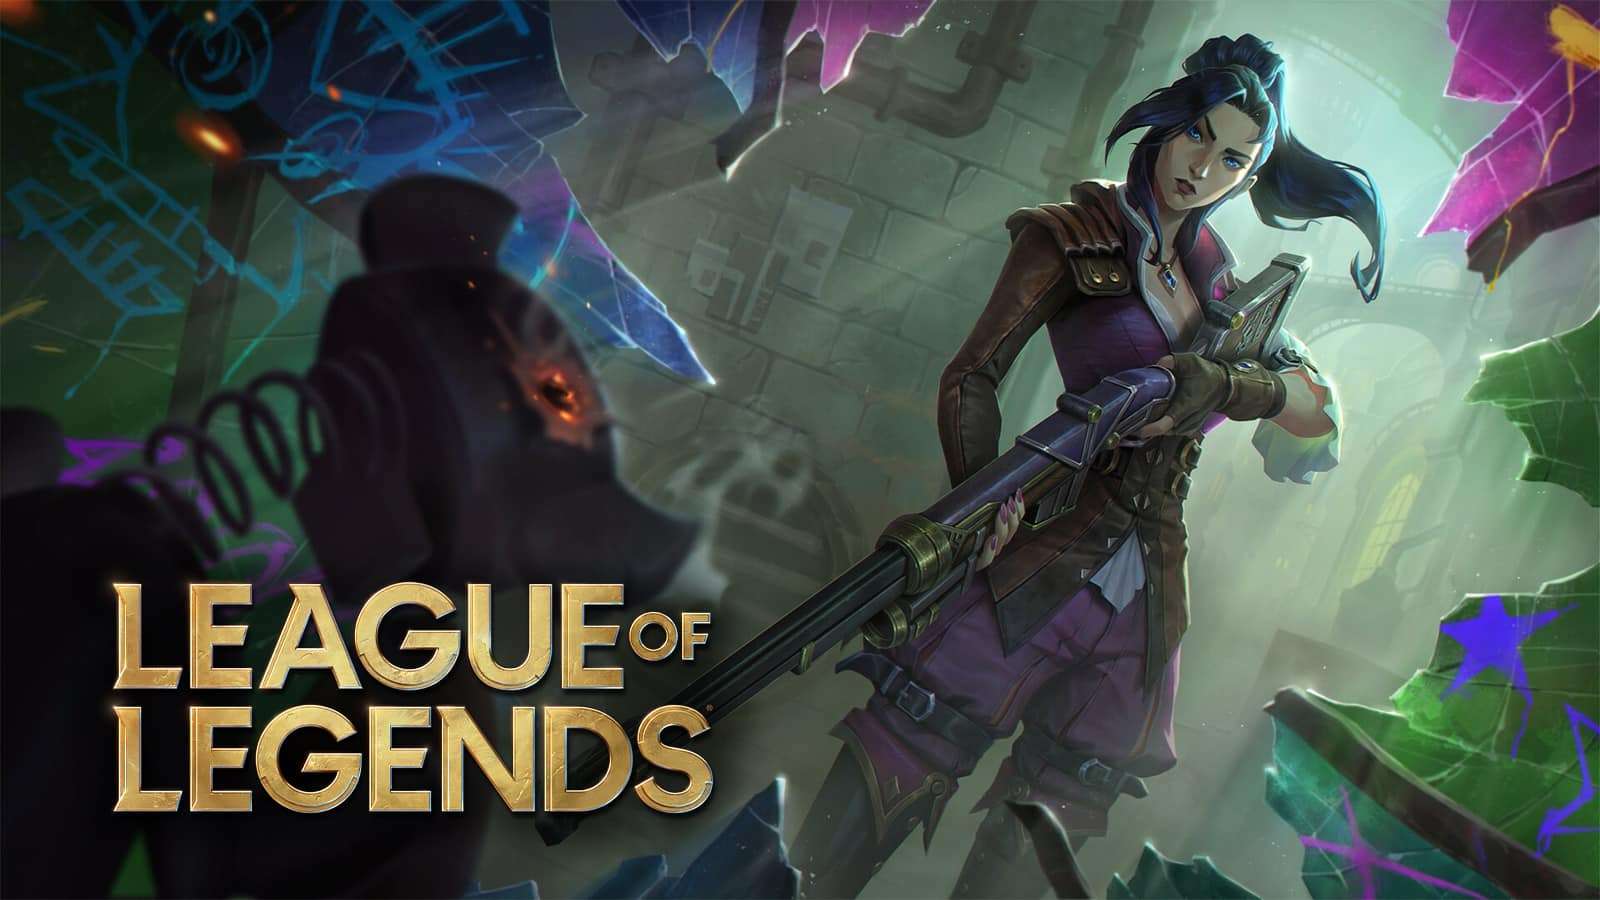 Arcane Caitlyn in League of legends